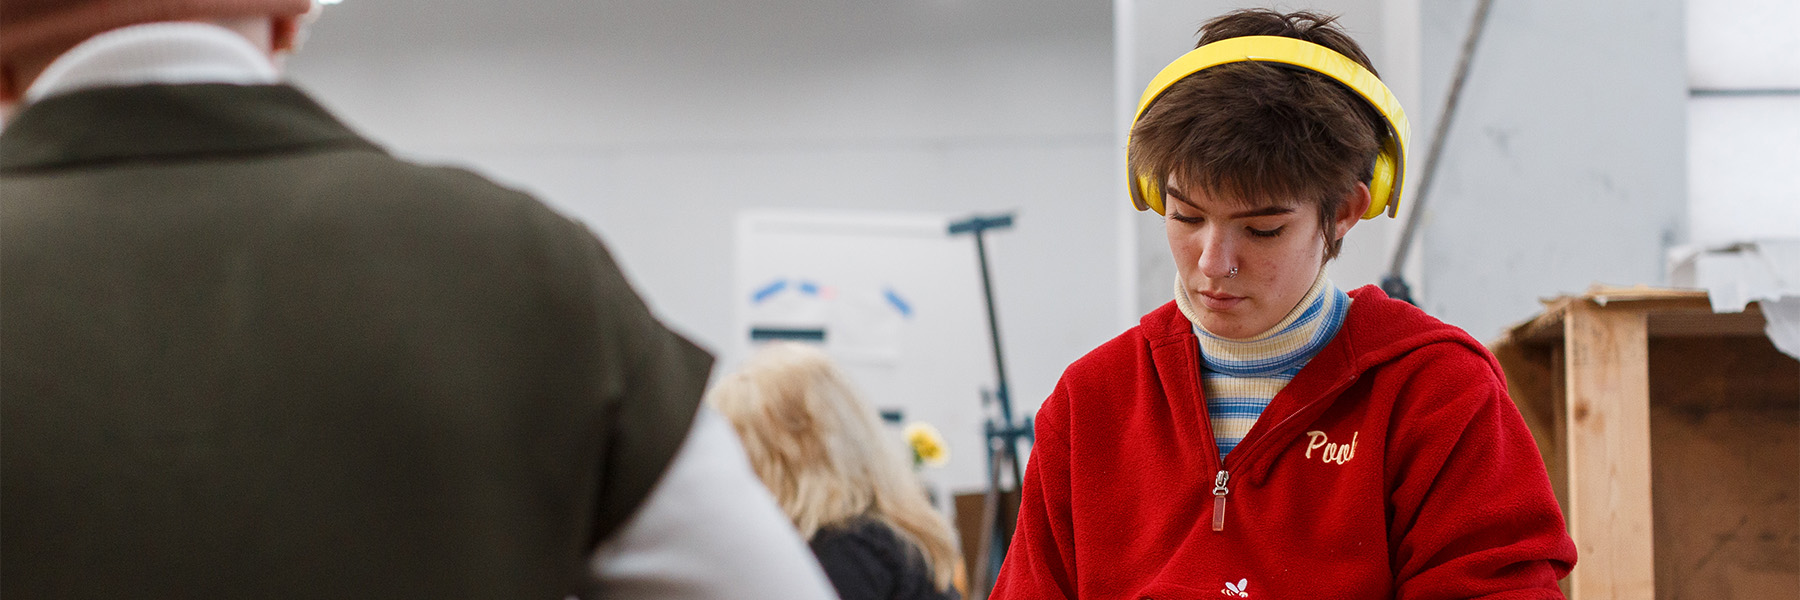 A student wearing a crimson jacket and large yellow earphones works on a project in the Herron School of Art + Design